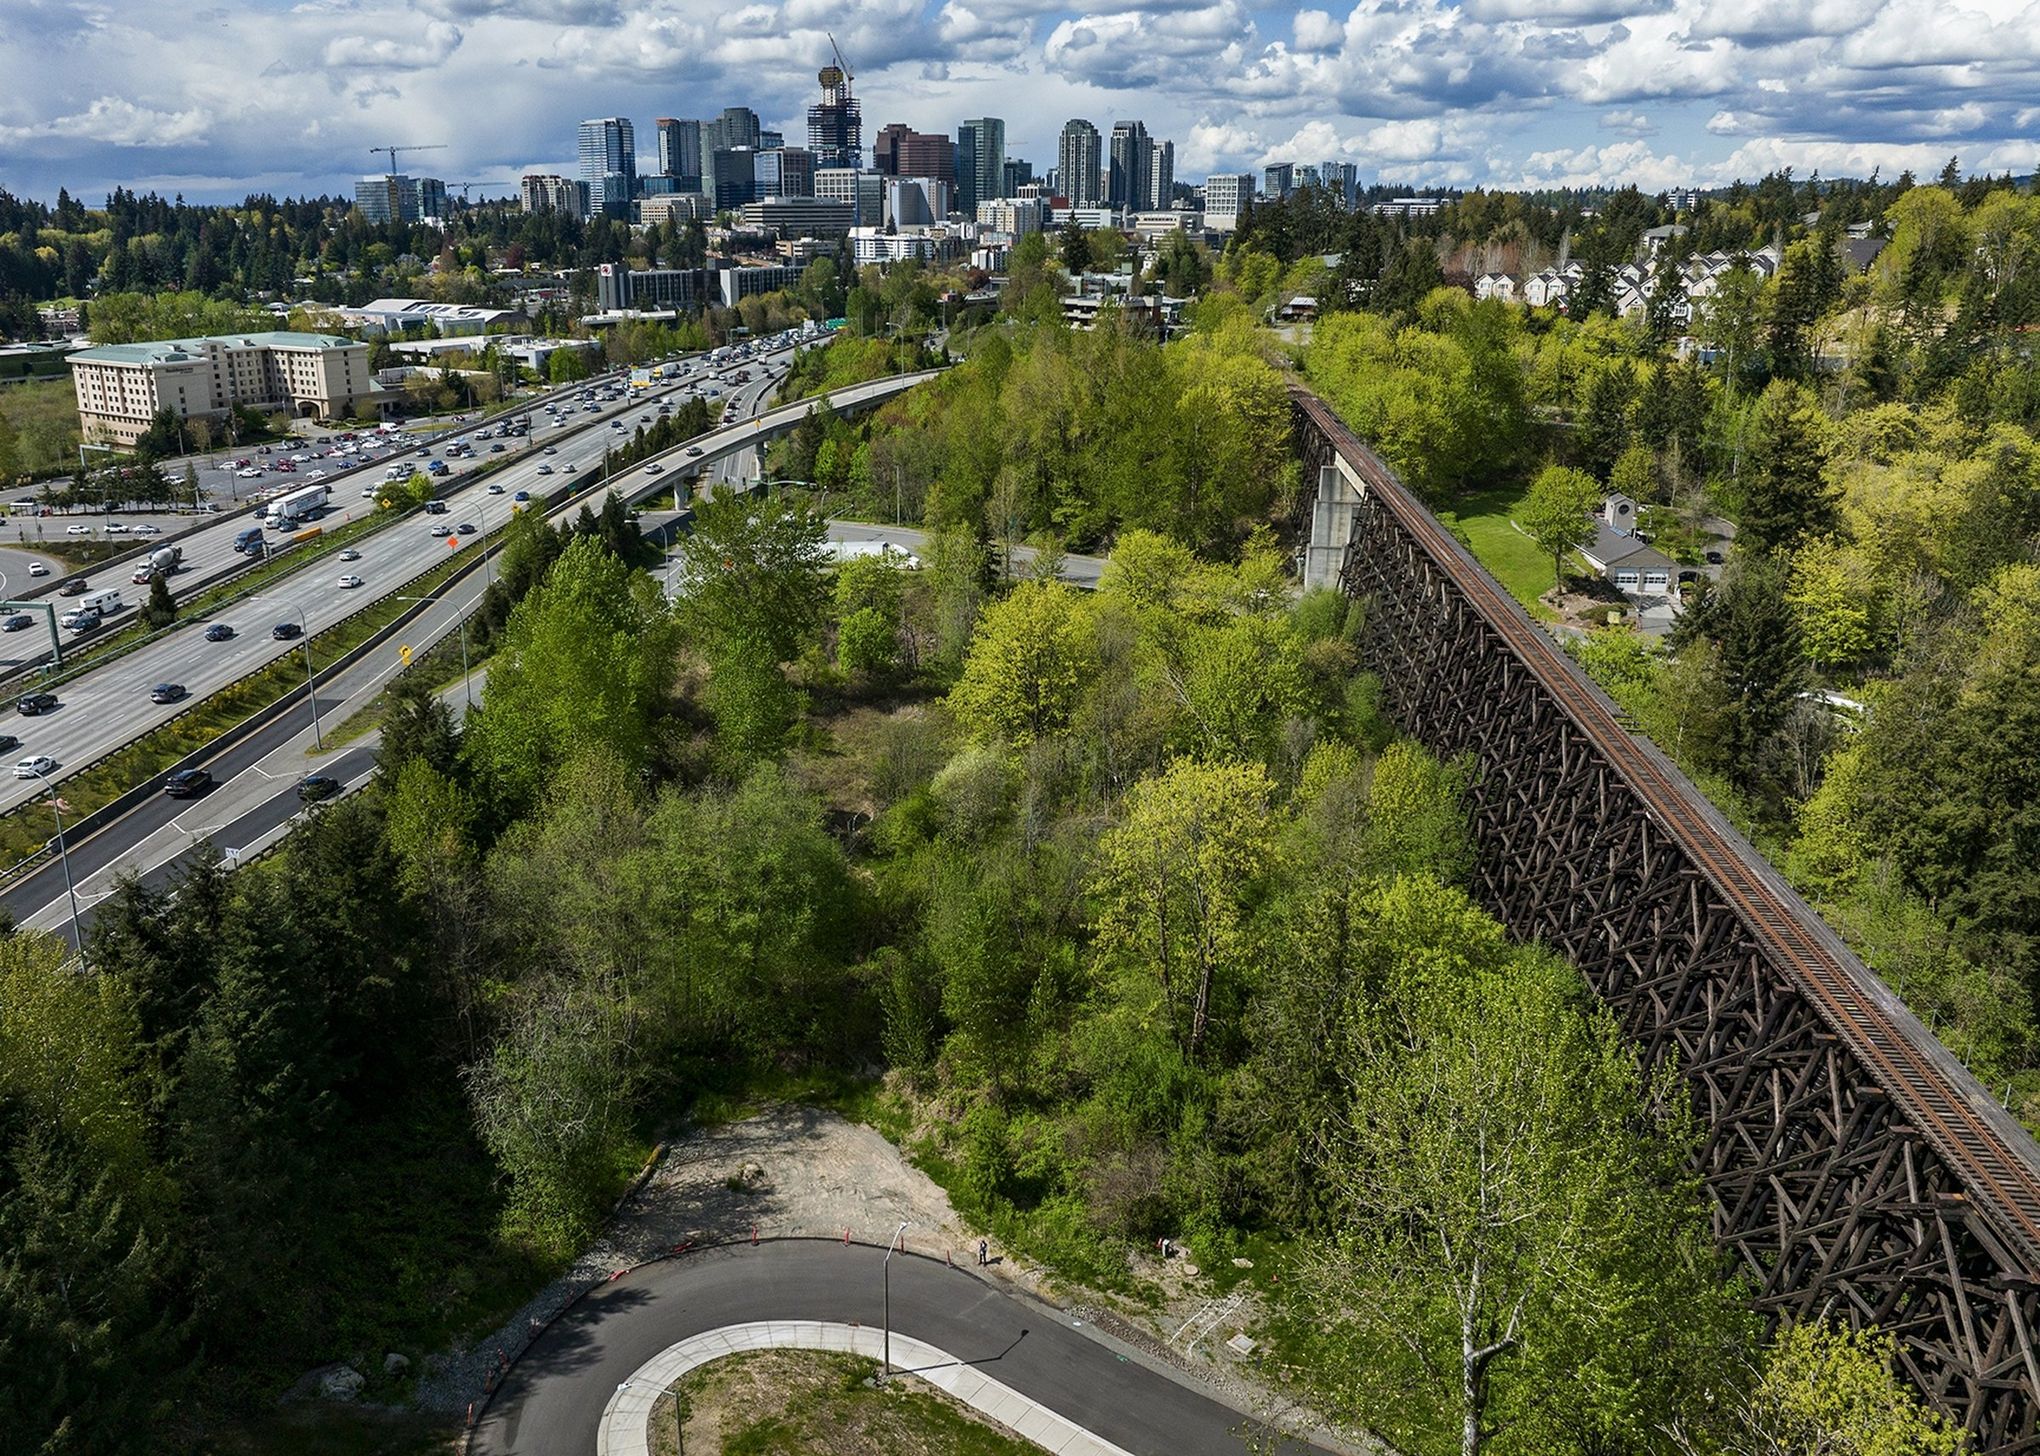 The Wilburton trestle bridge is seen from the air with downtown Bellevue in the background